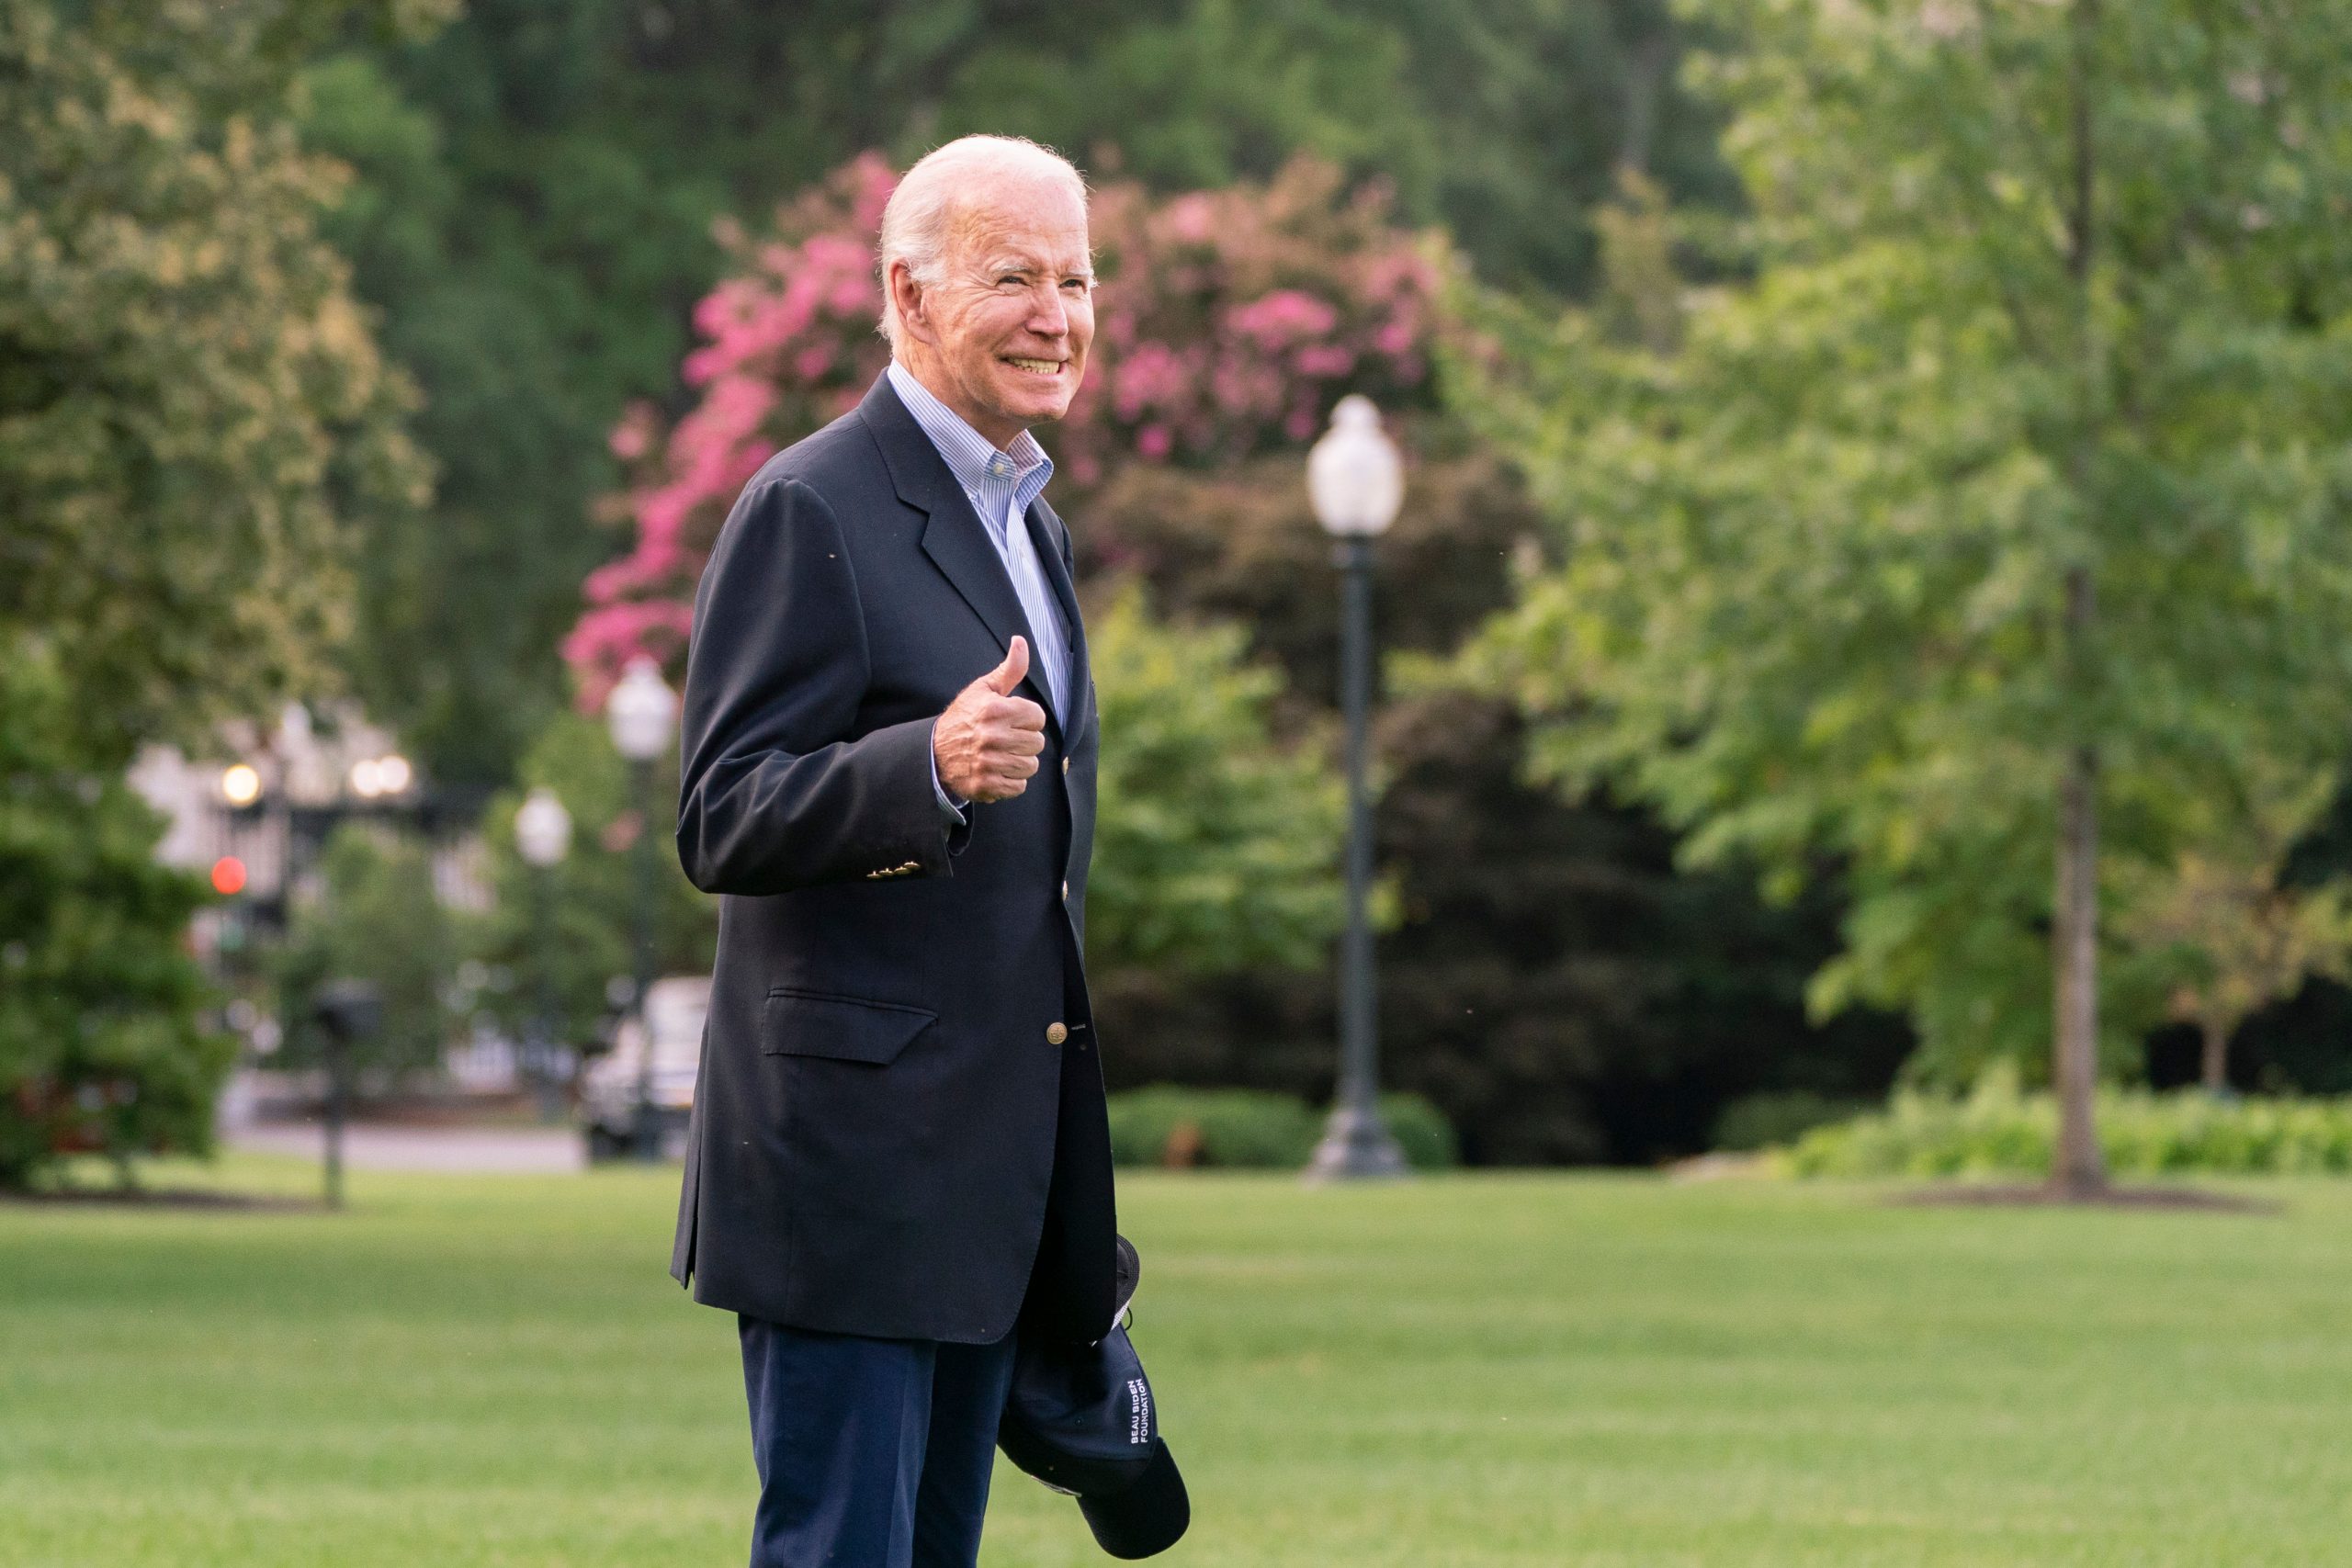 Can a US President take government documents home? What Joe Biden said